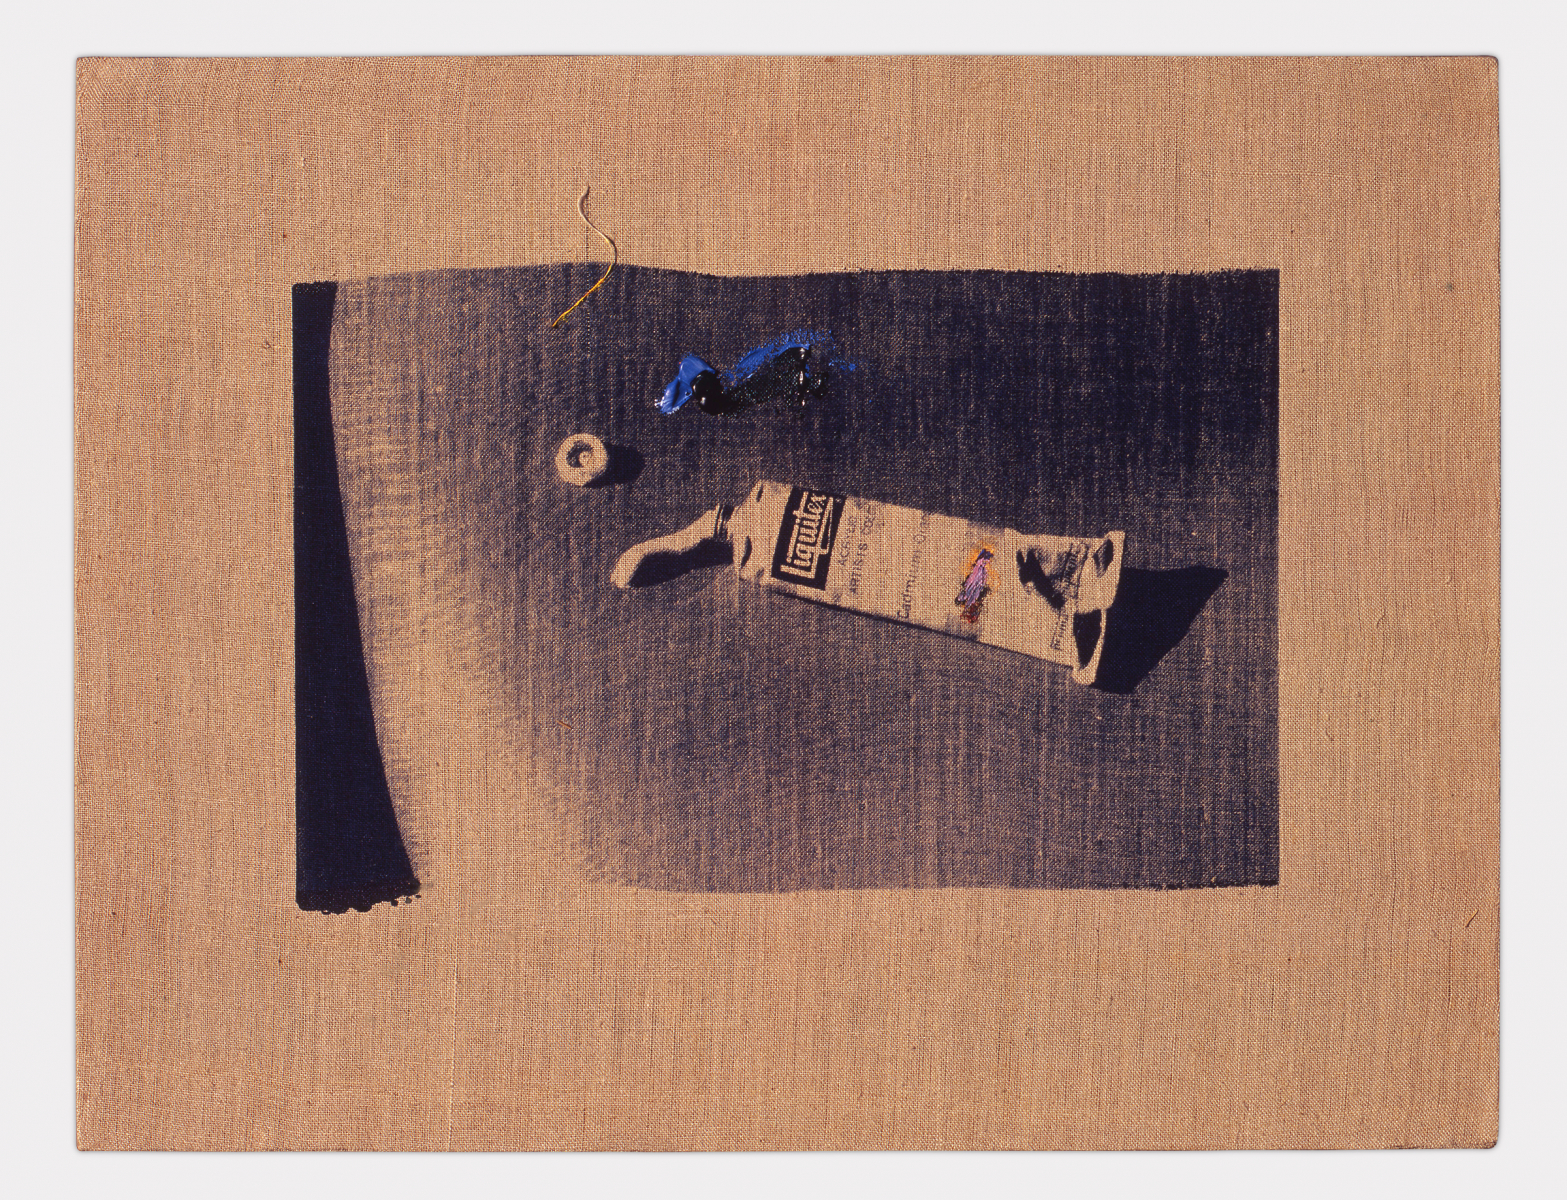 Untitled-76277, 1976, Serigraphy on Canvas, 50x65.2cm